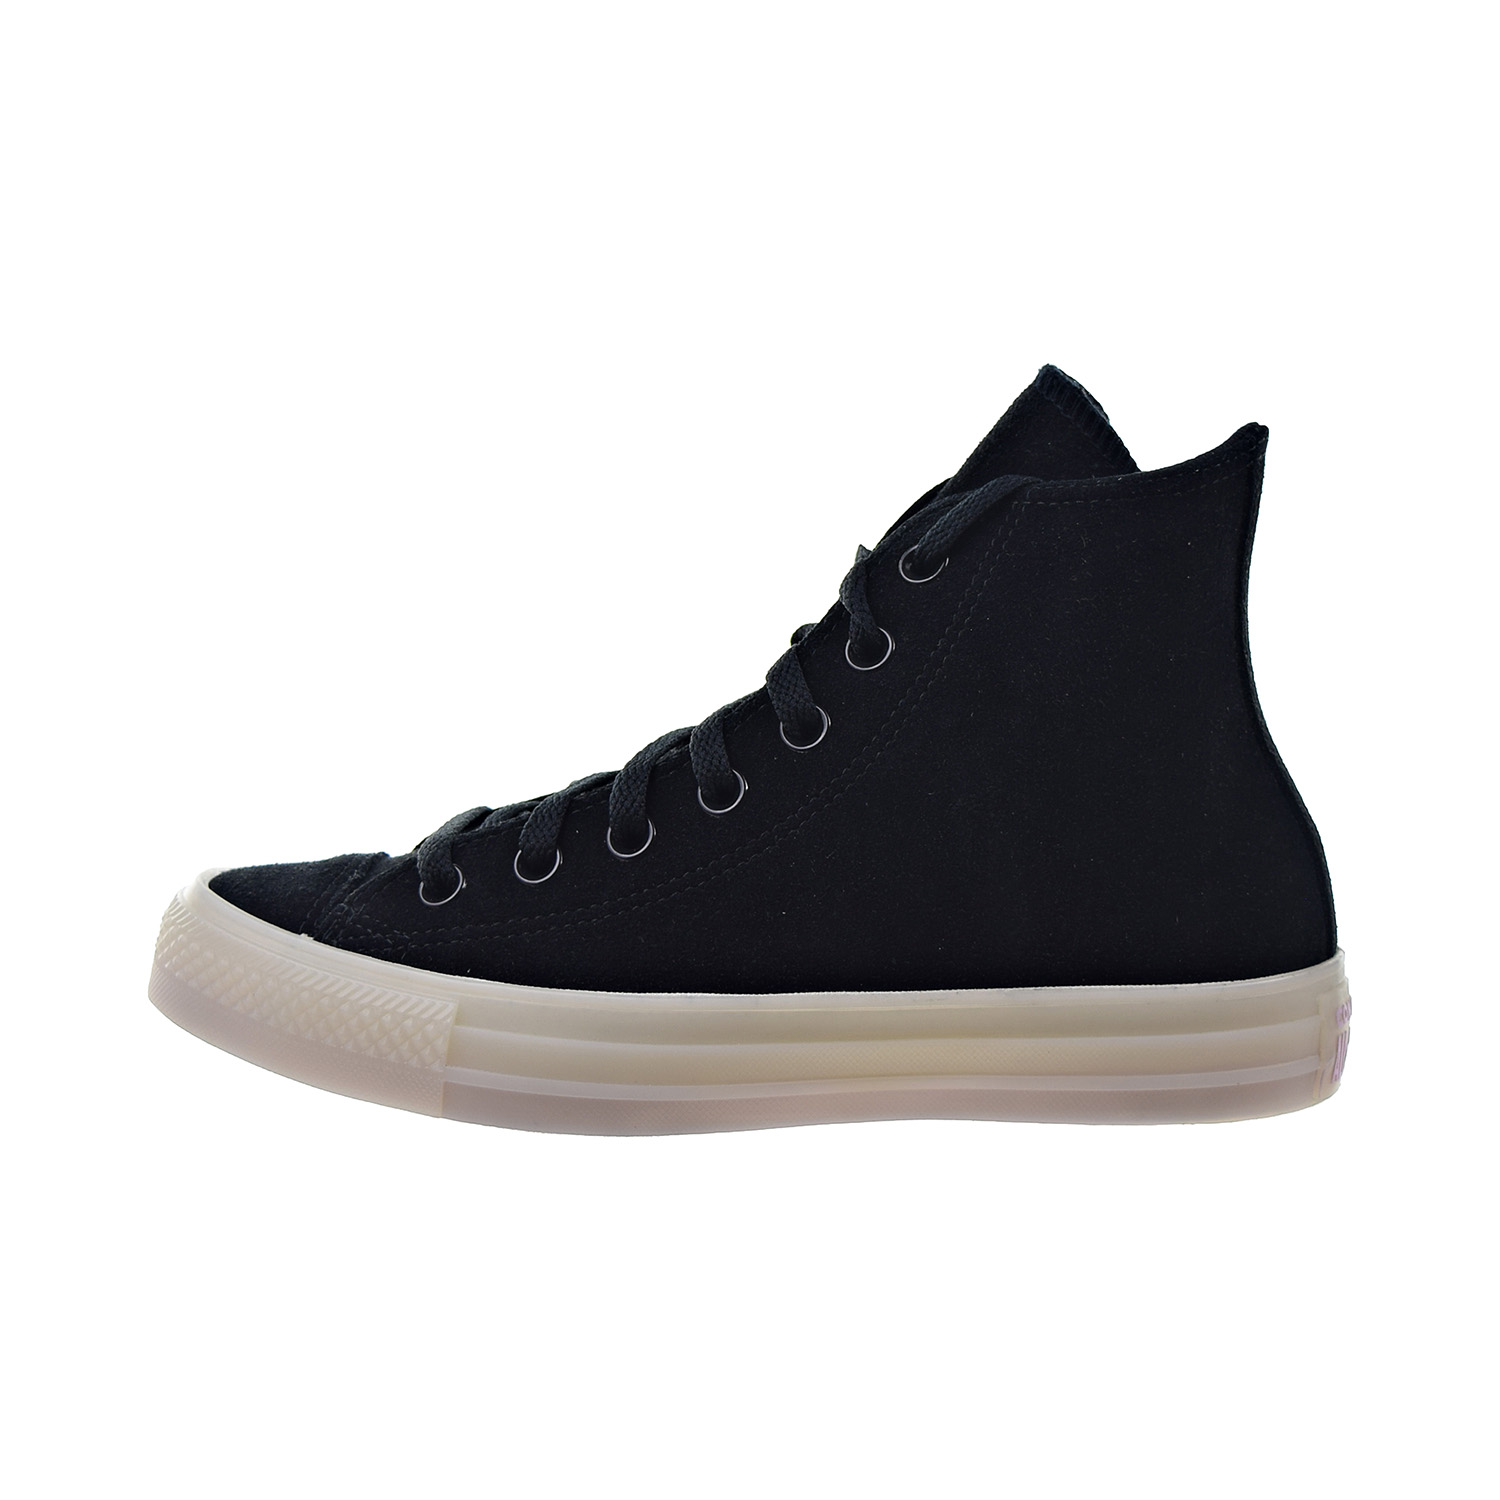 Converse Chuck Taylor All Star Men's Shoes Black-Lilac Mist 166138c - image 4 of 6